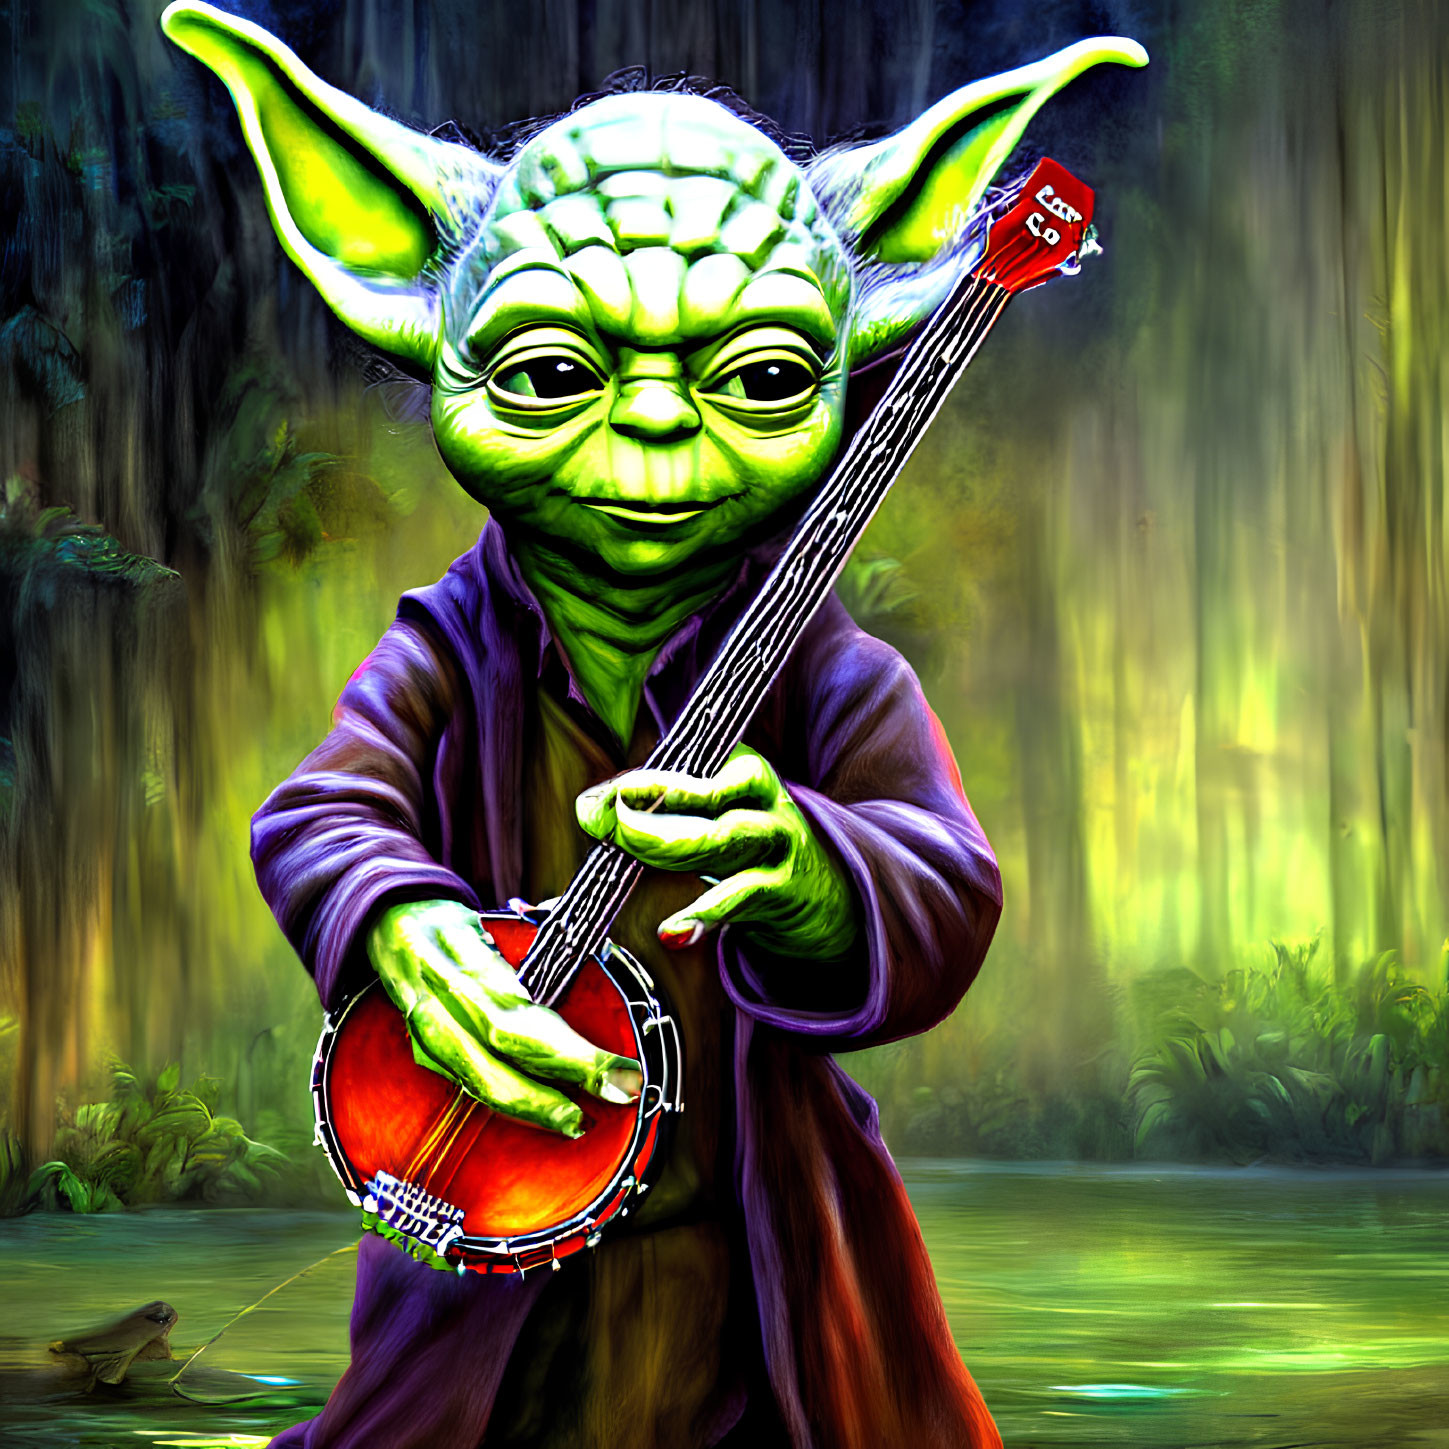 Fictional character Yoda playing red banjo in mystical forest